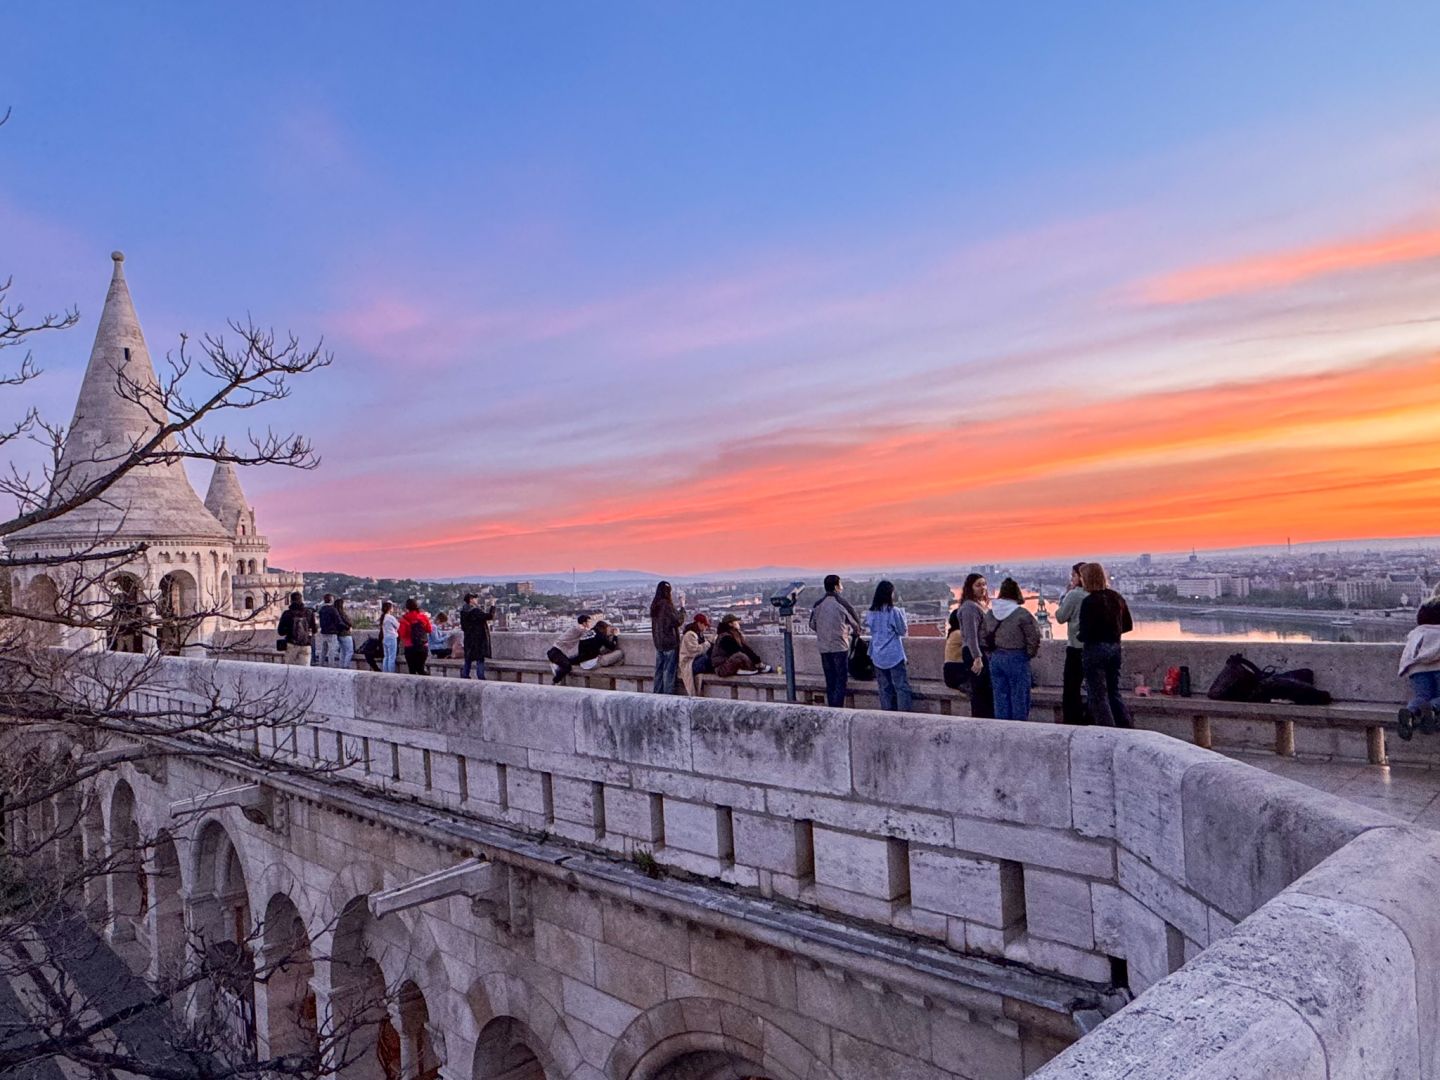 Tourists admiring the dawn at Fisherman's Bastion.